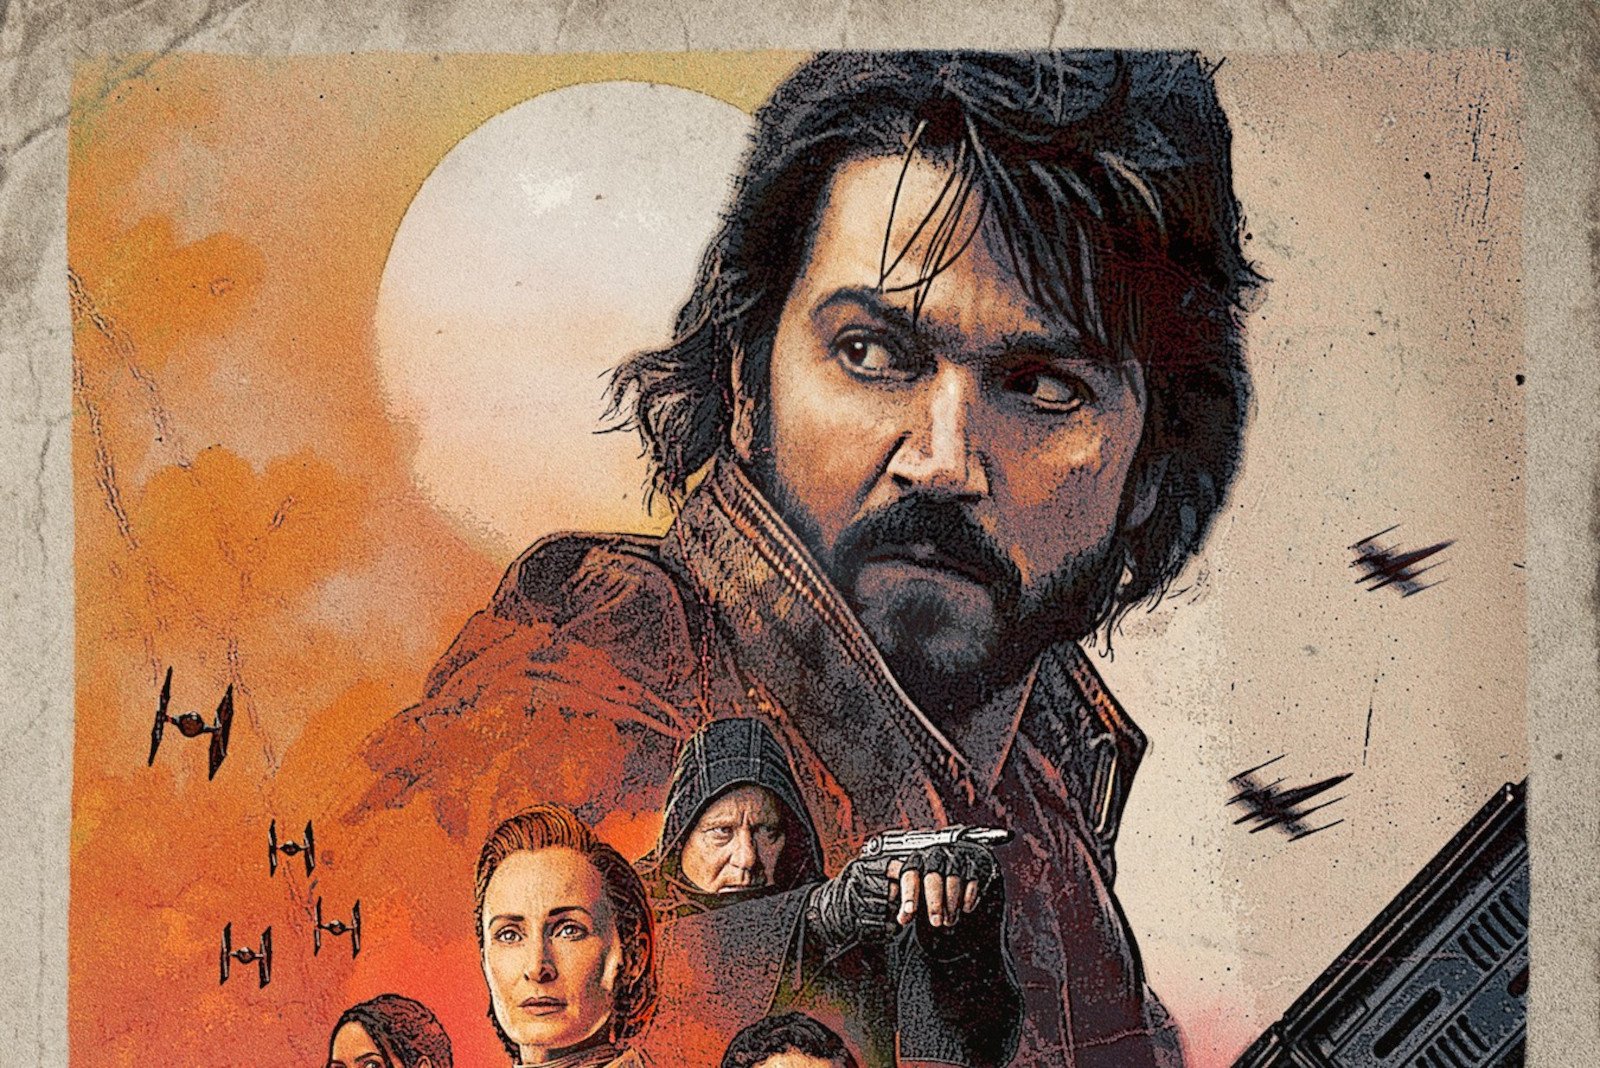 Poster art for 'Andor,' which had its release date delayed from August 2022 to September. It features Diego Luna as Cassian Andor, as well as other key characters.